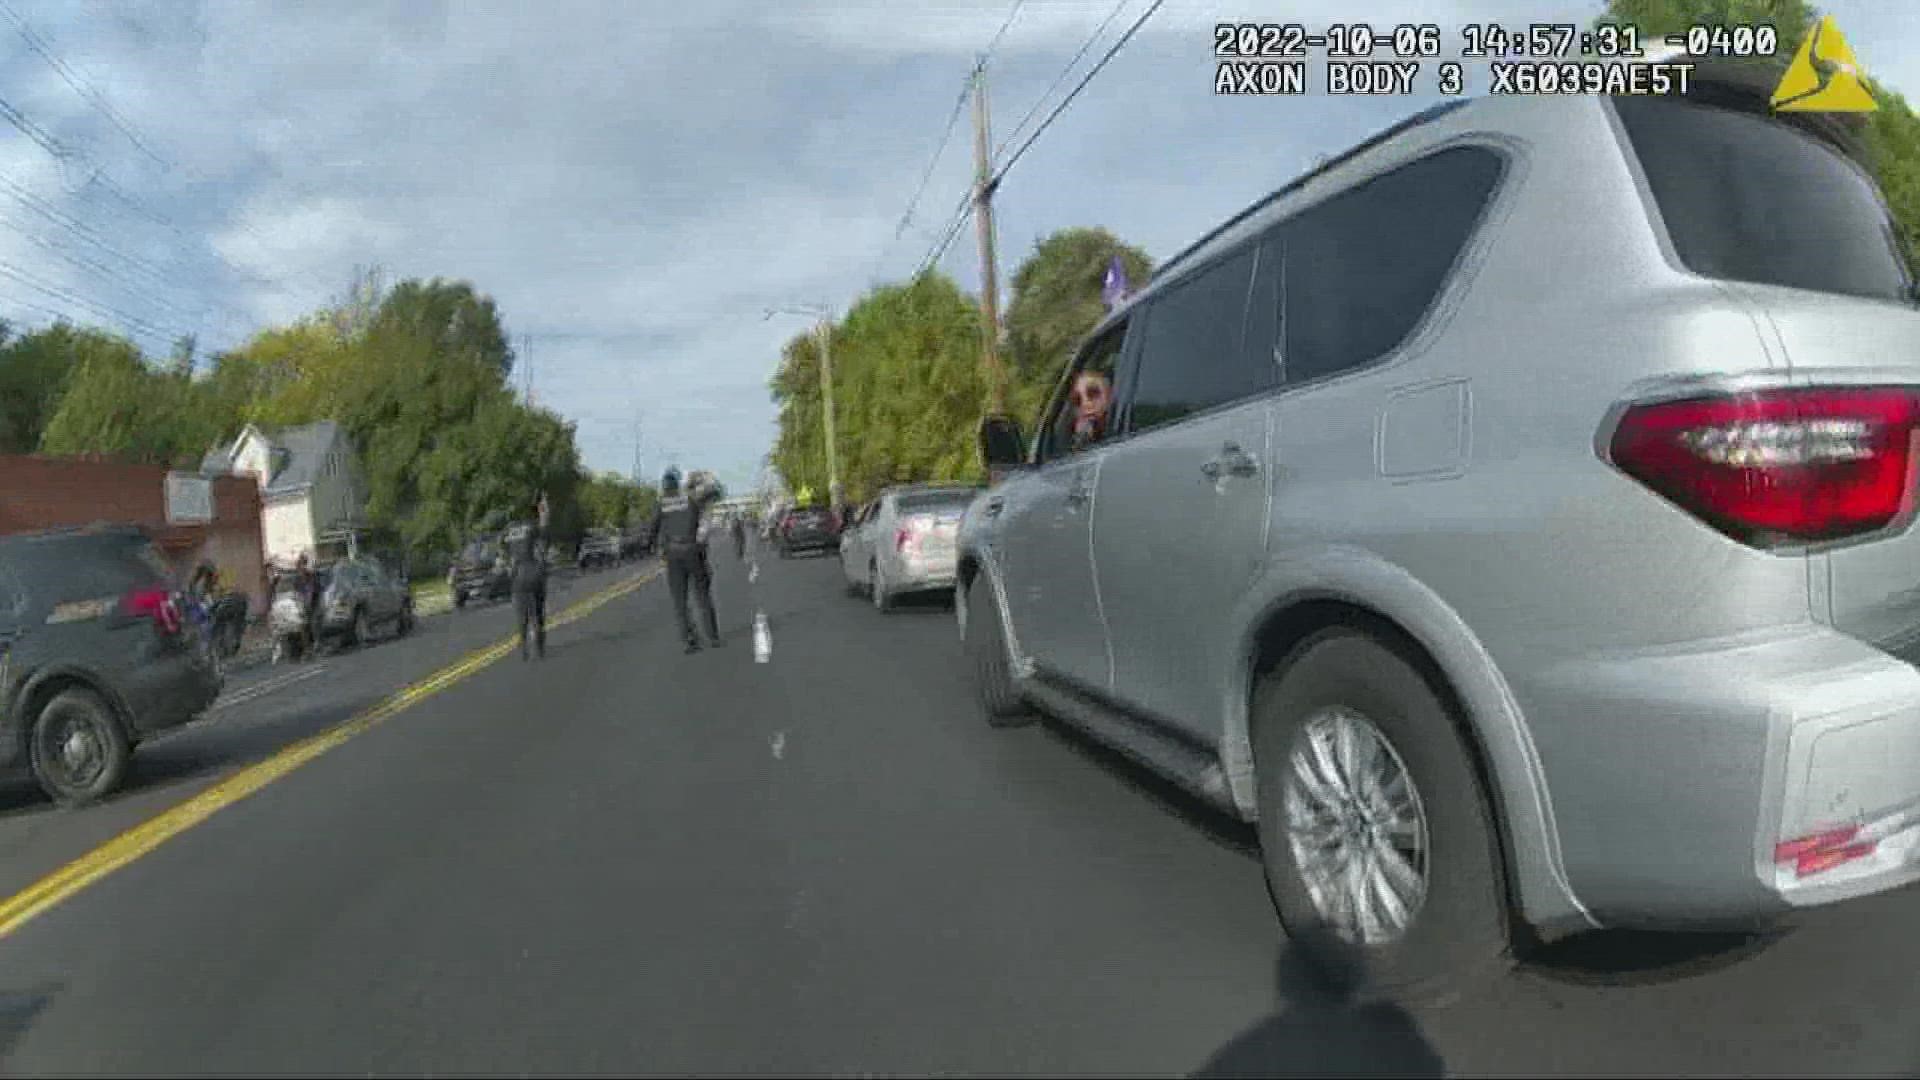 The newly released footage shows the chaotic scene after the crash on October 6 when more shots rang out.